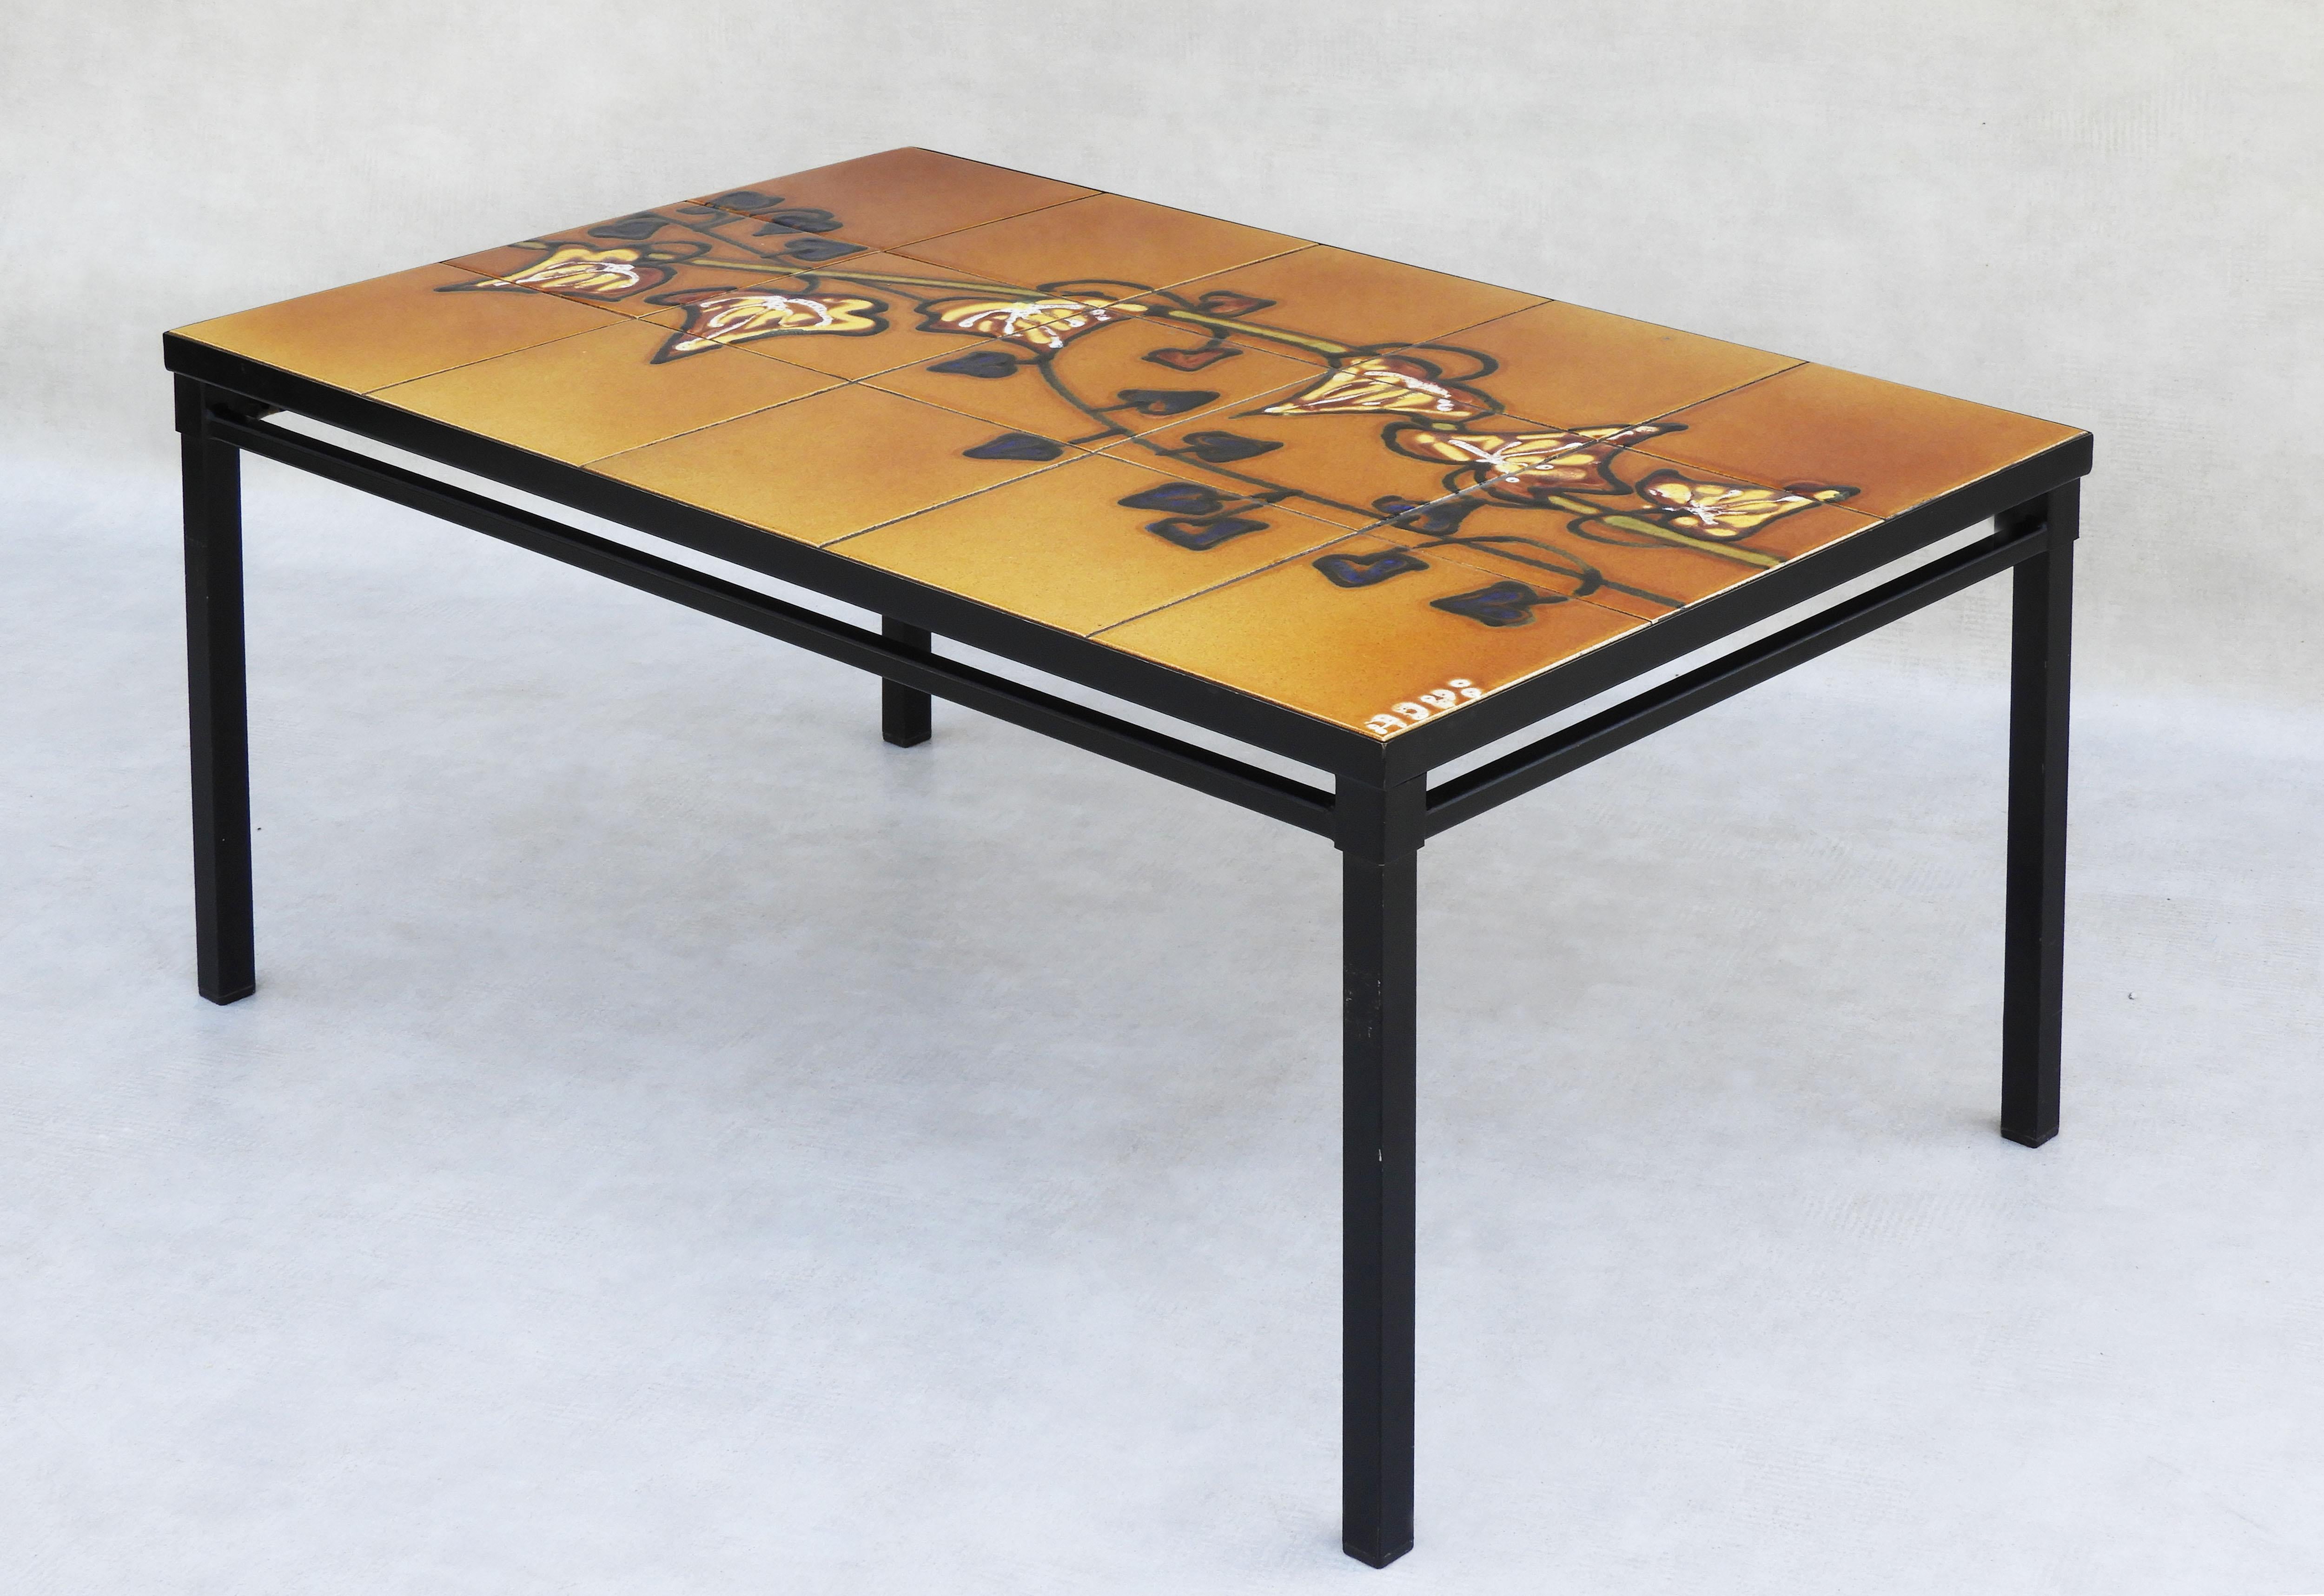 Vintage mid century tile top coffee table by ADRI c1960
€595.00

Vintage mid-century tile top table by Belgian furniture makers ADRI c1960

Stylish and practical, hand-decorated ceramic tile topped table on painted steel legs.

In great